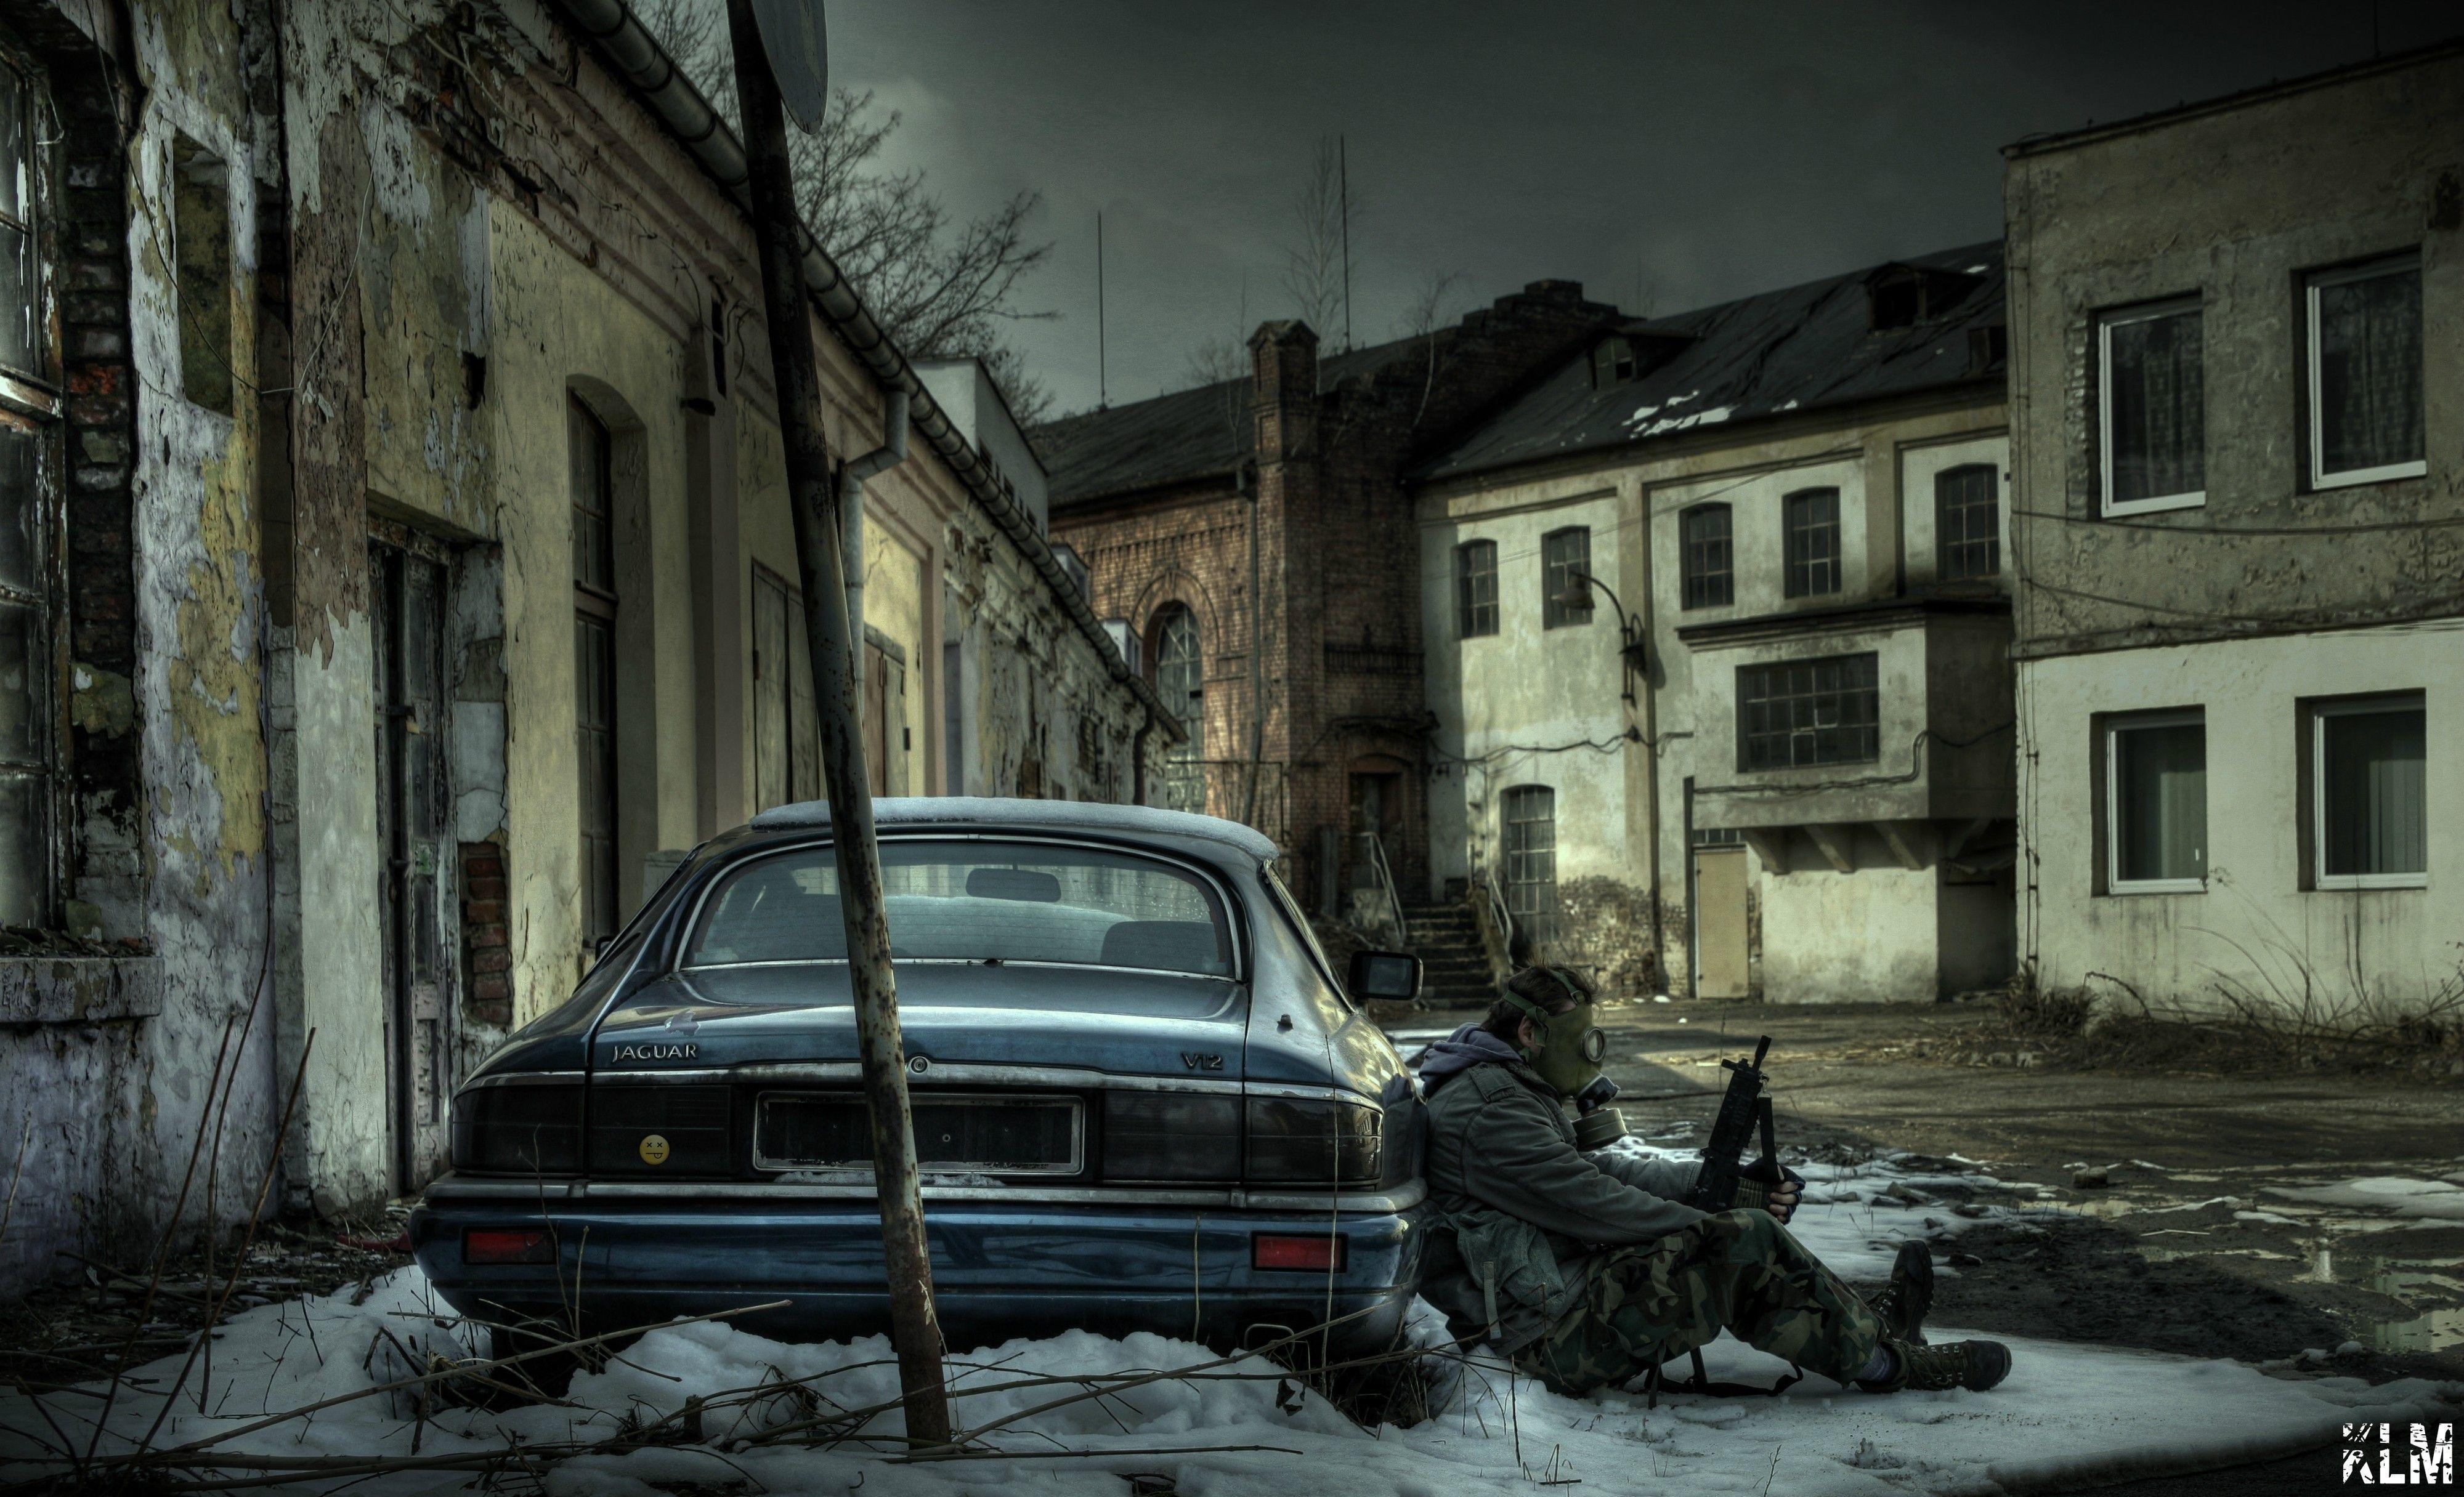 Ghost Town in Poland wallpaper and image, picture